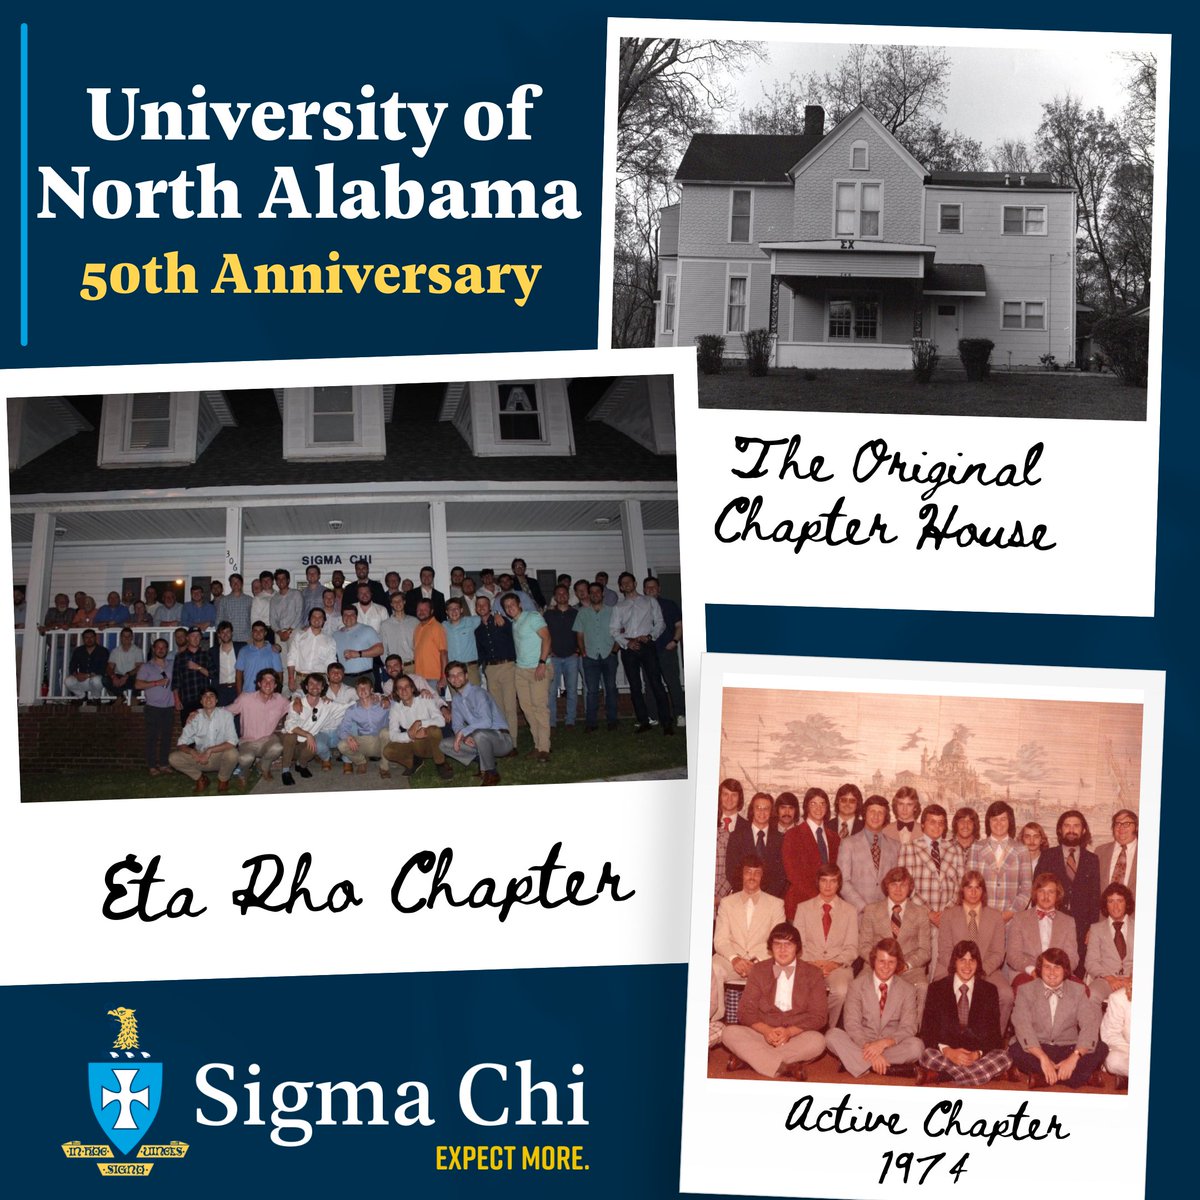 Congratulations to the Sigs of the Eta Rho Chapter at the University of North Alabama who are celebrating their chapter's 50th anniversary today! Here’s to many more years of Sigma Chi on campus! In Hoc Signo Vinces 🤝